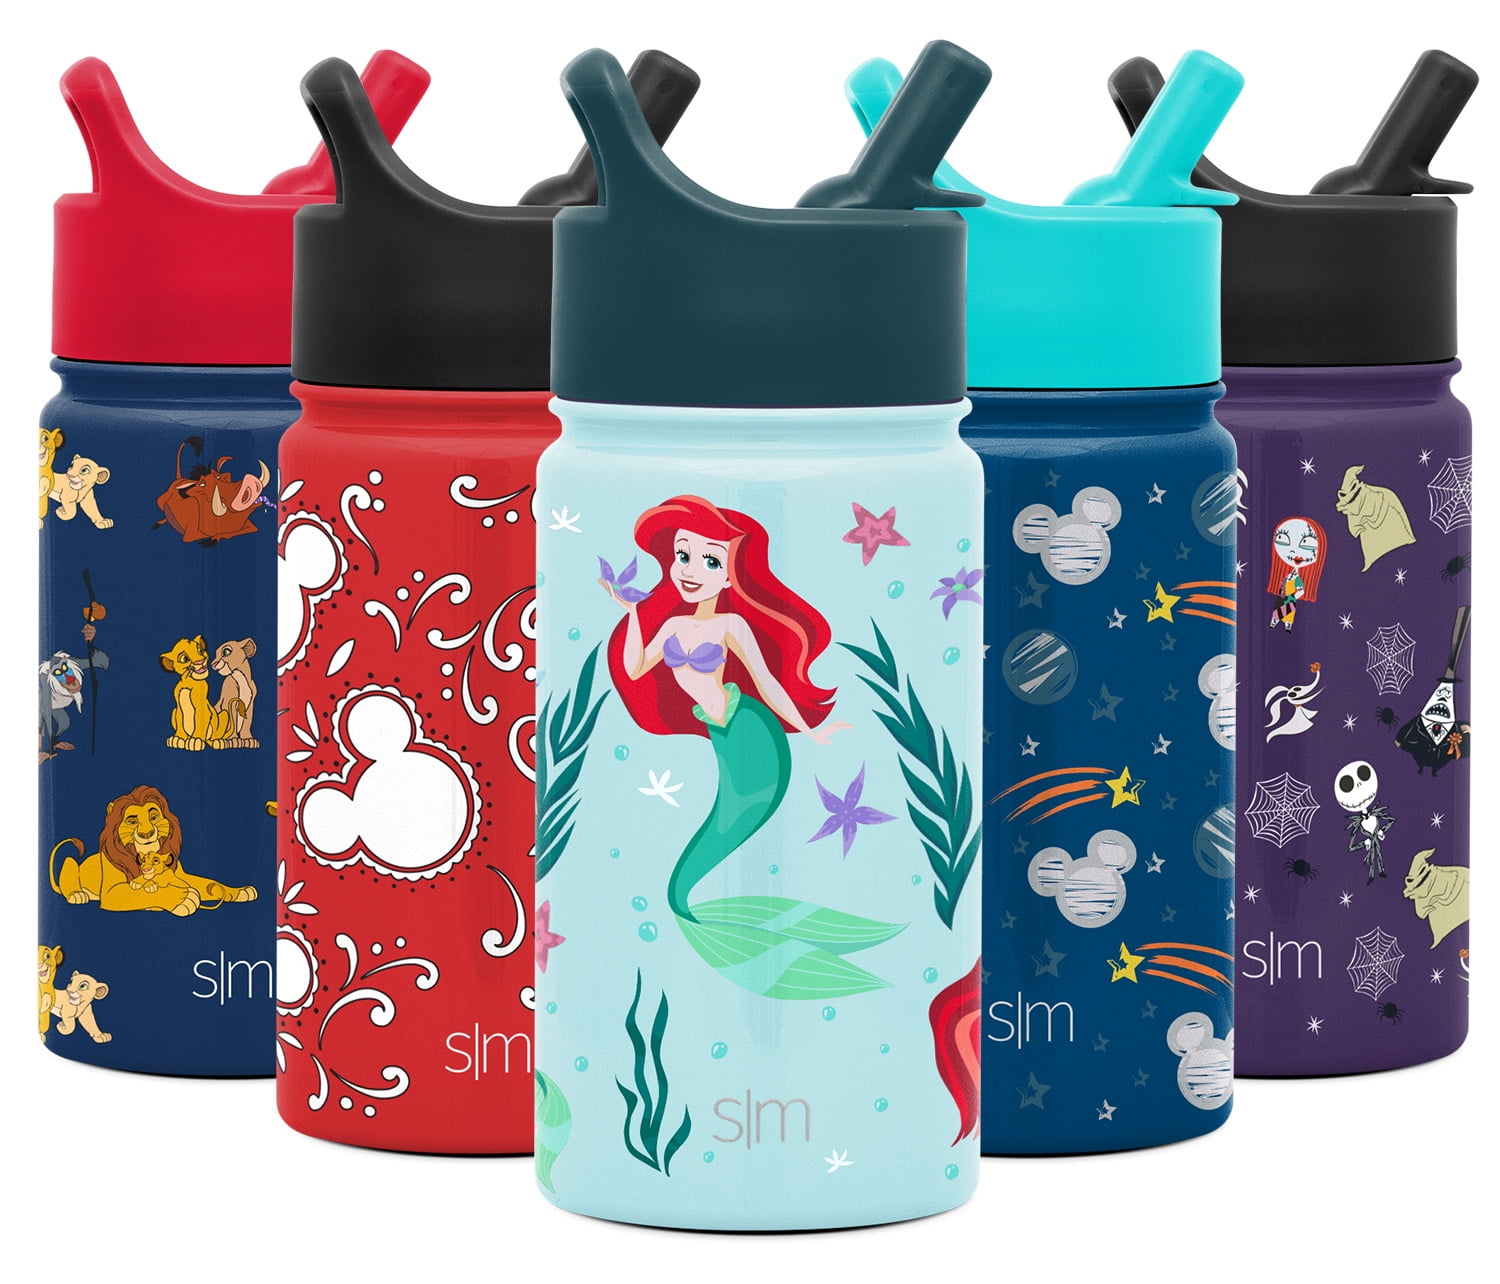 The Little Mermaid Stainless Steel Water Bottle with Built-In